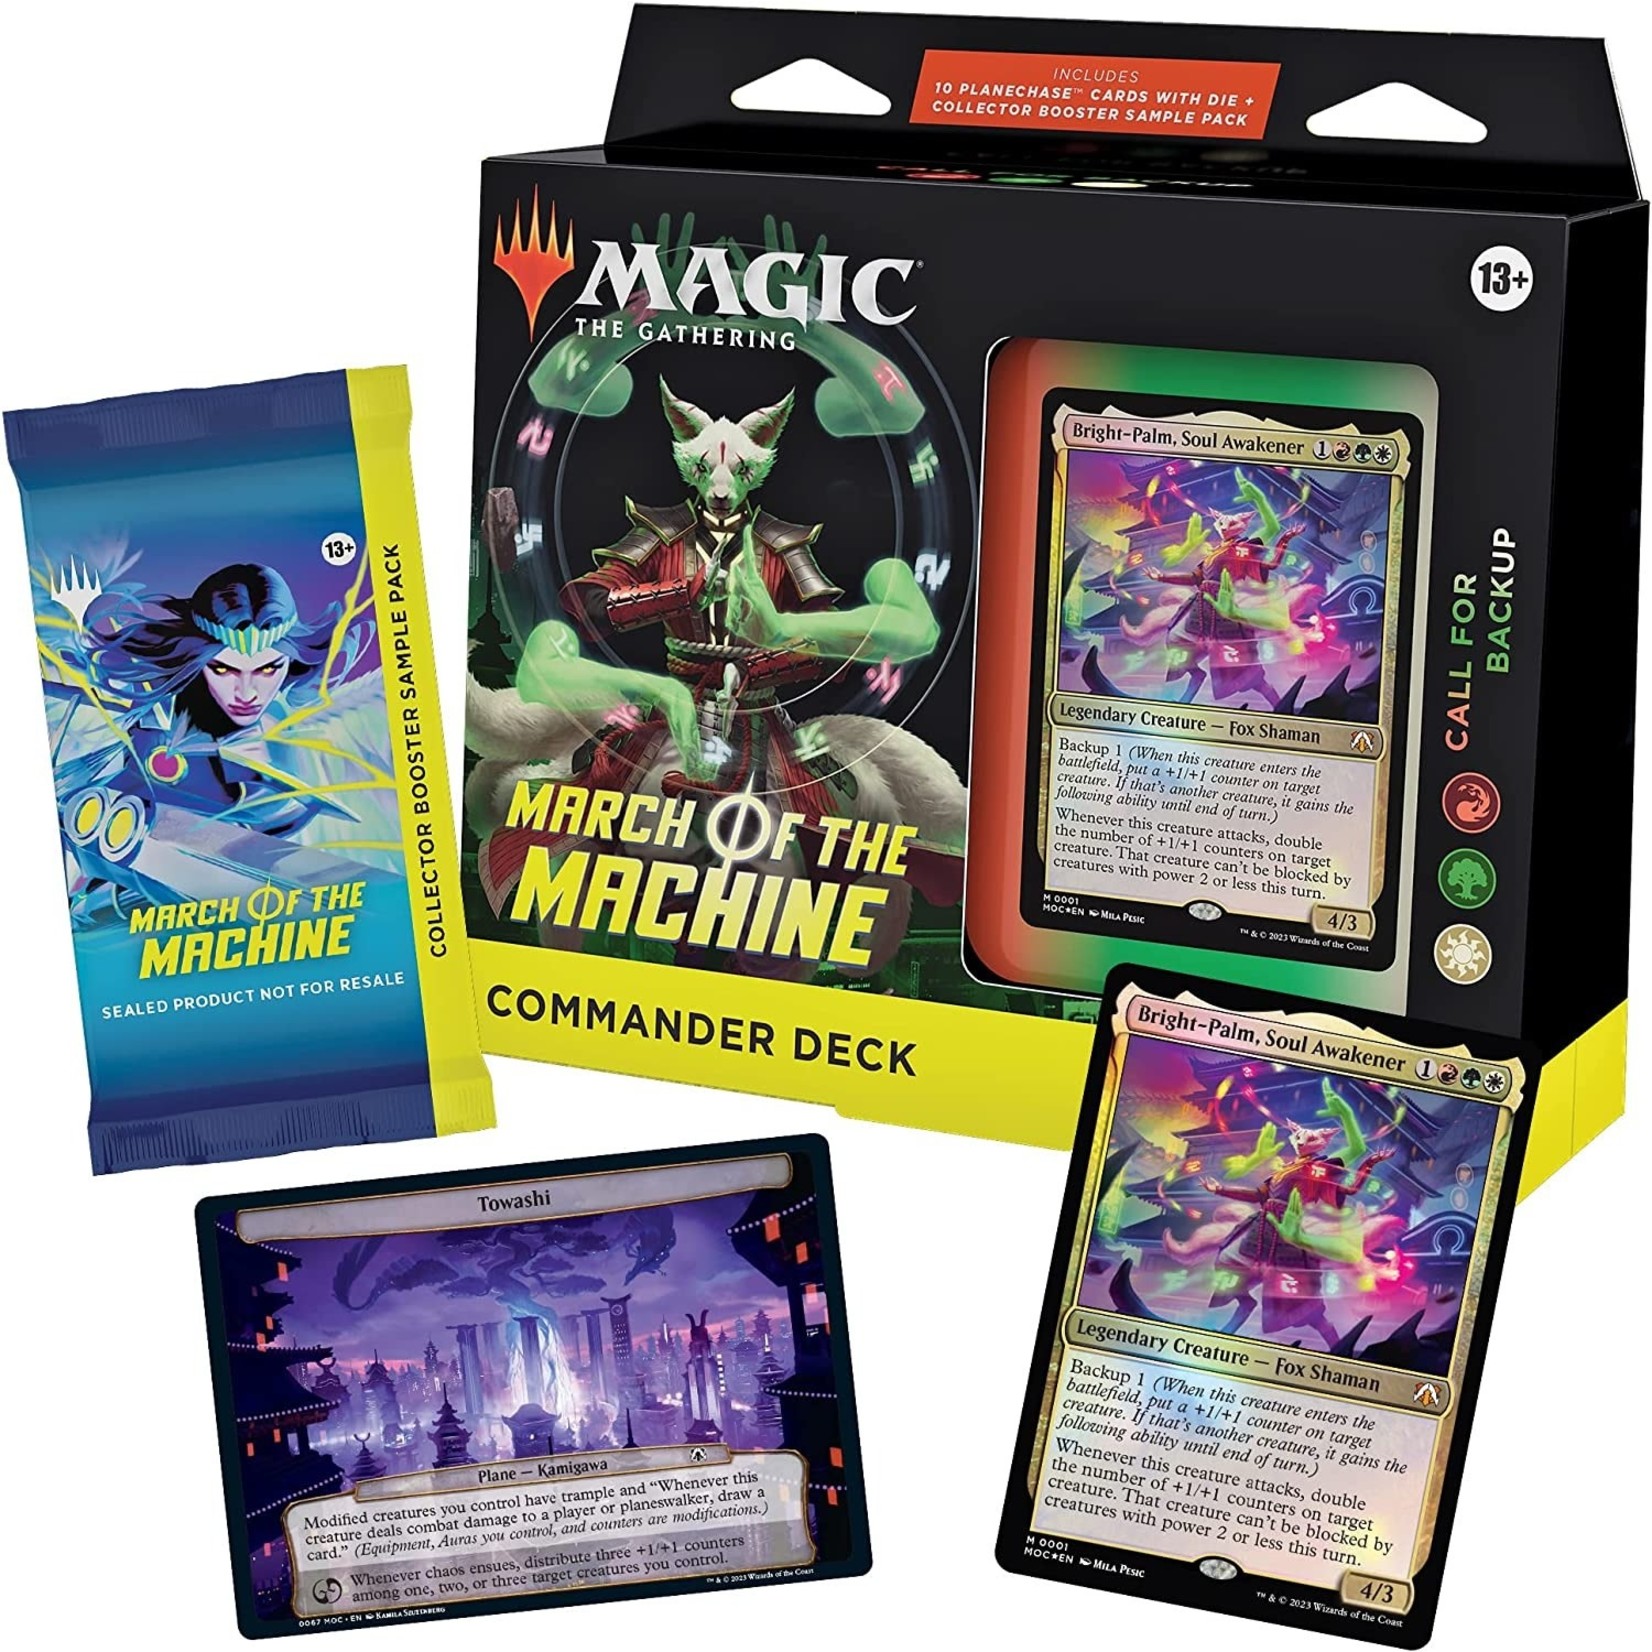 Magic: The Gathering - March of the Machine Commander Deck